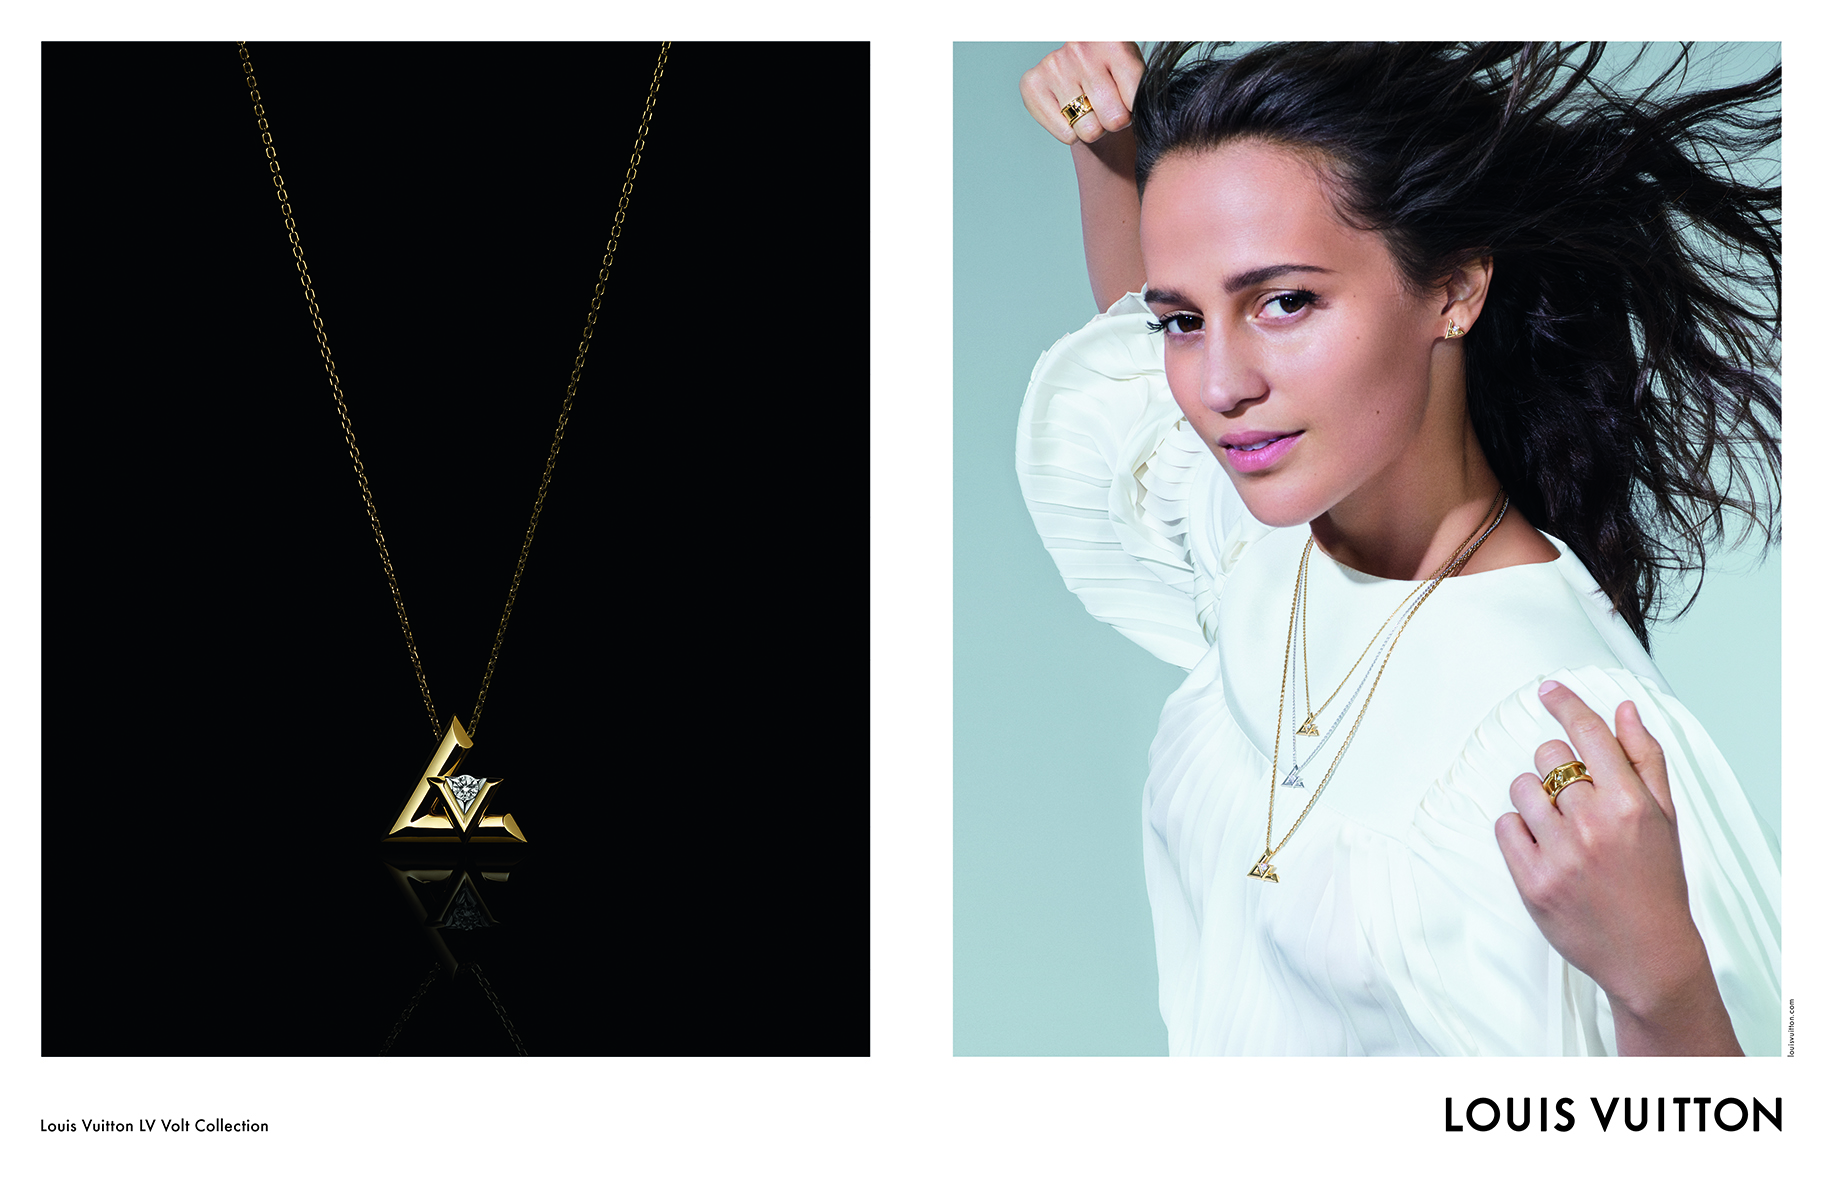 2011 Louis Vuitton High Jewellery Collection vintage print Ad